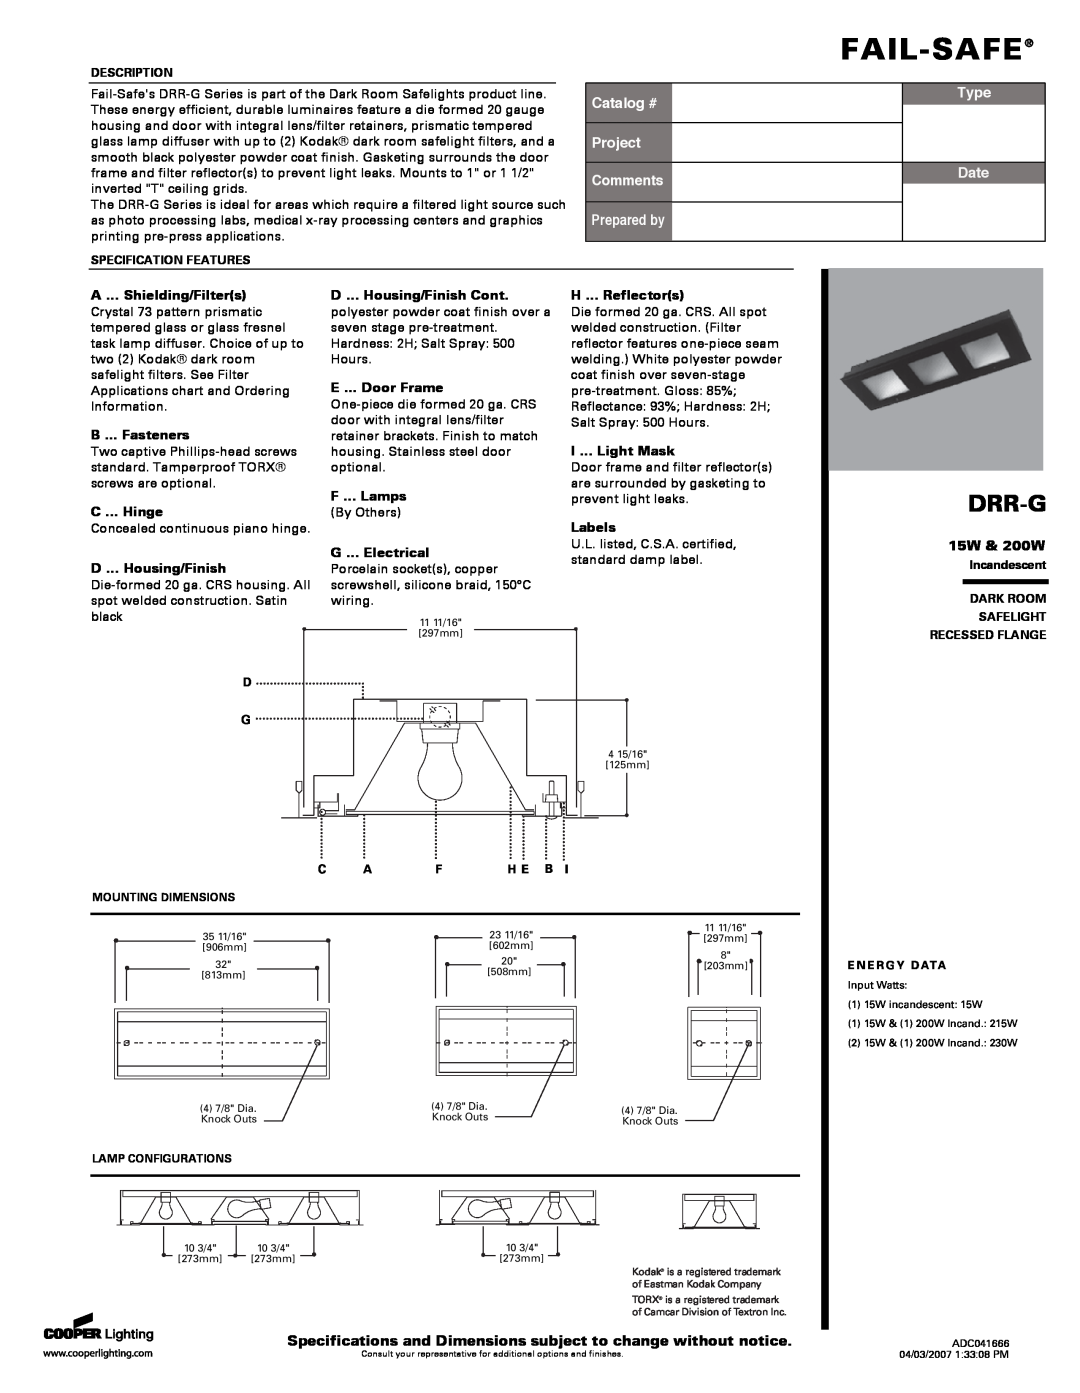 Cooper Lighting DRR-G specifications 15W & 200W, Fail-Safe, Drr-G, Catalog #, Project Comments, Prepared by, Type, Date 